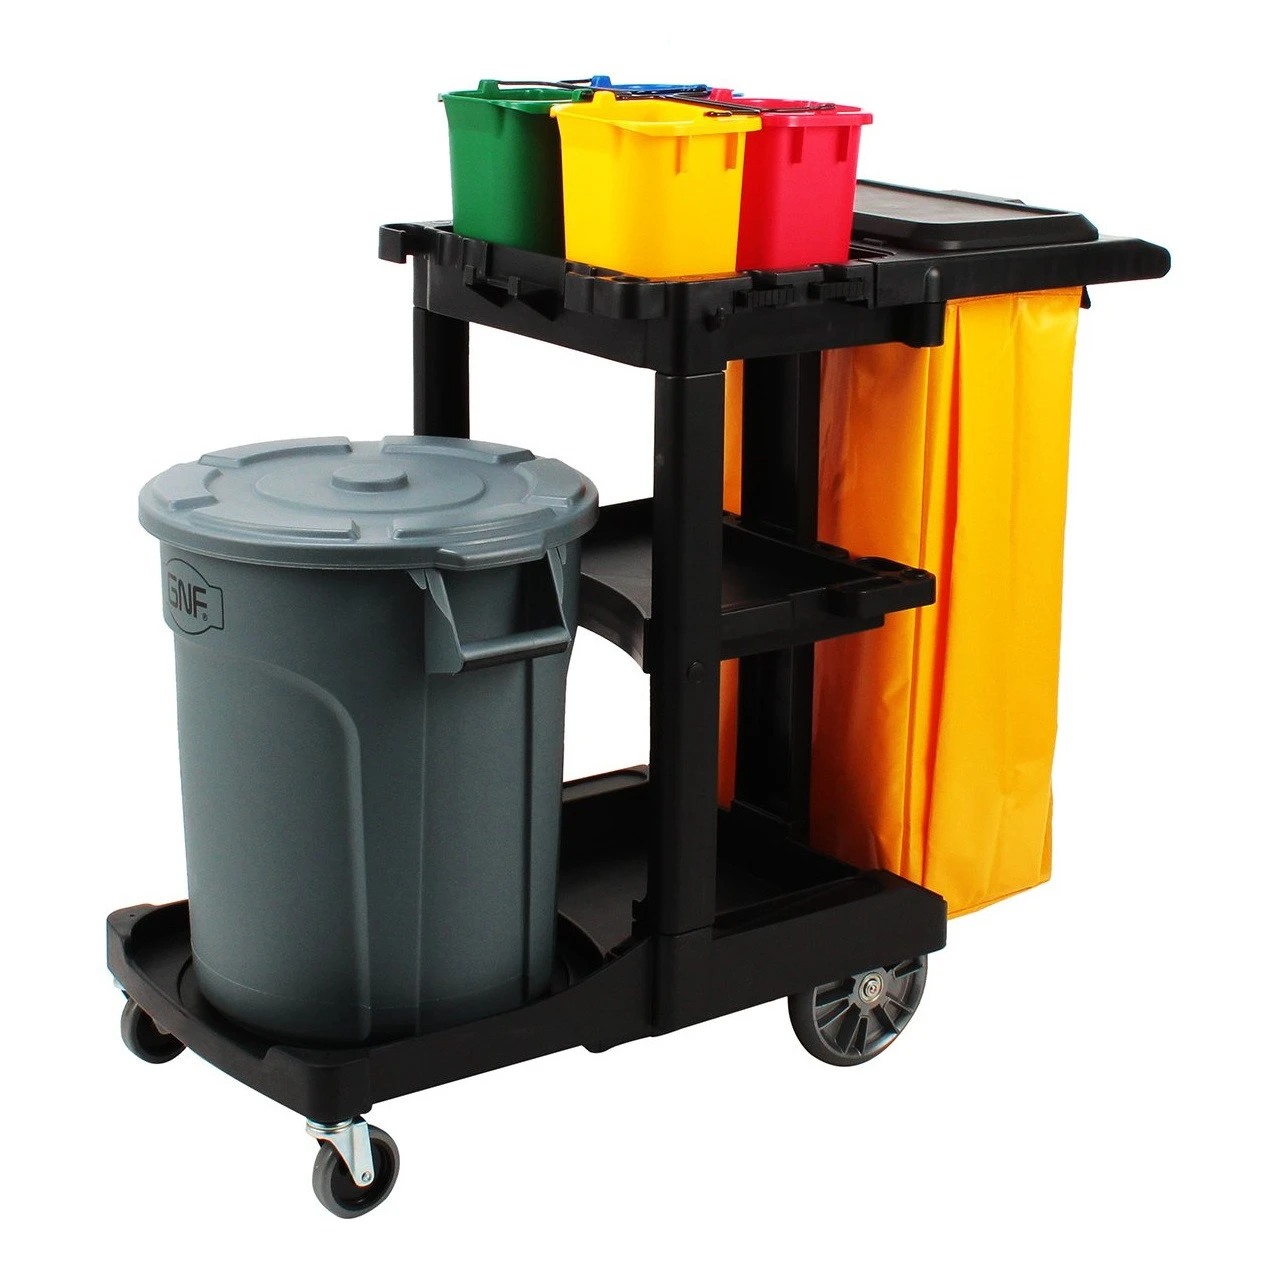 Utility Cart Service Carts Janitorial Supplies Room Plate Collect Cleaning Trolley Plastic Hotel Restaurant